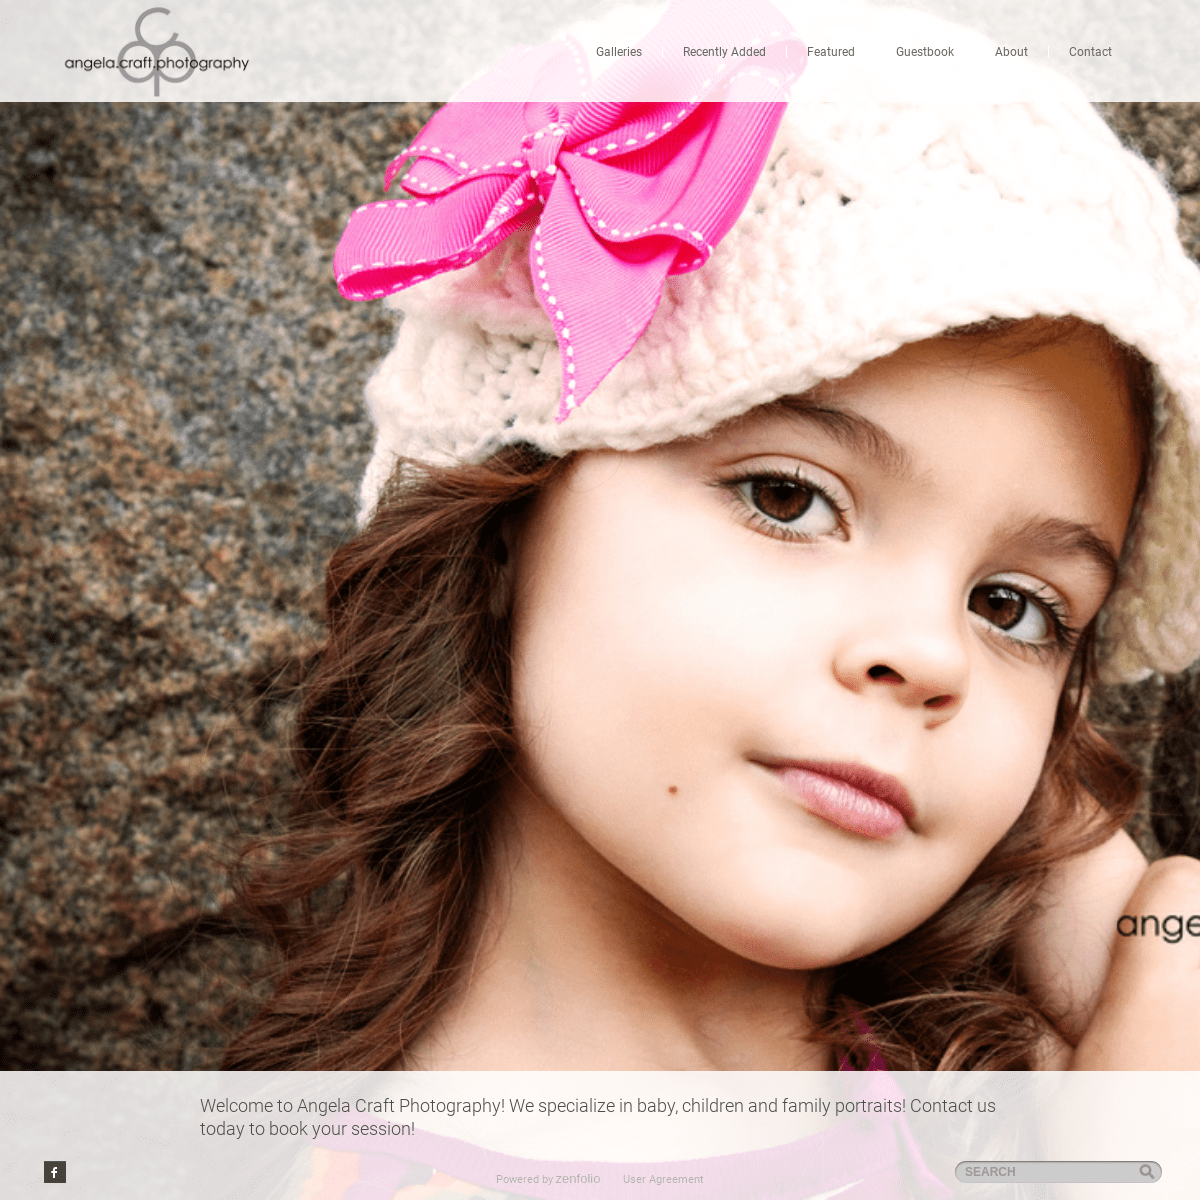 A complete backup of angelacraftphotography.com